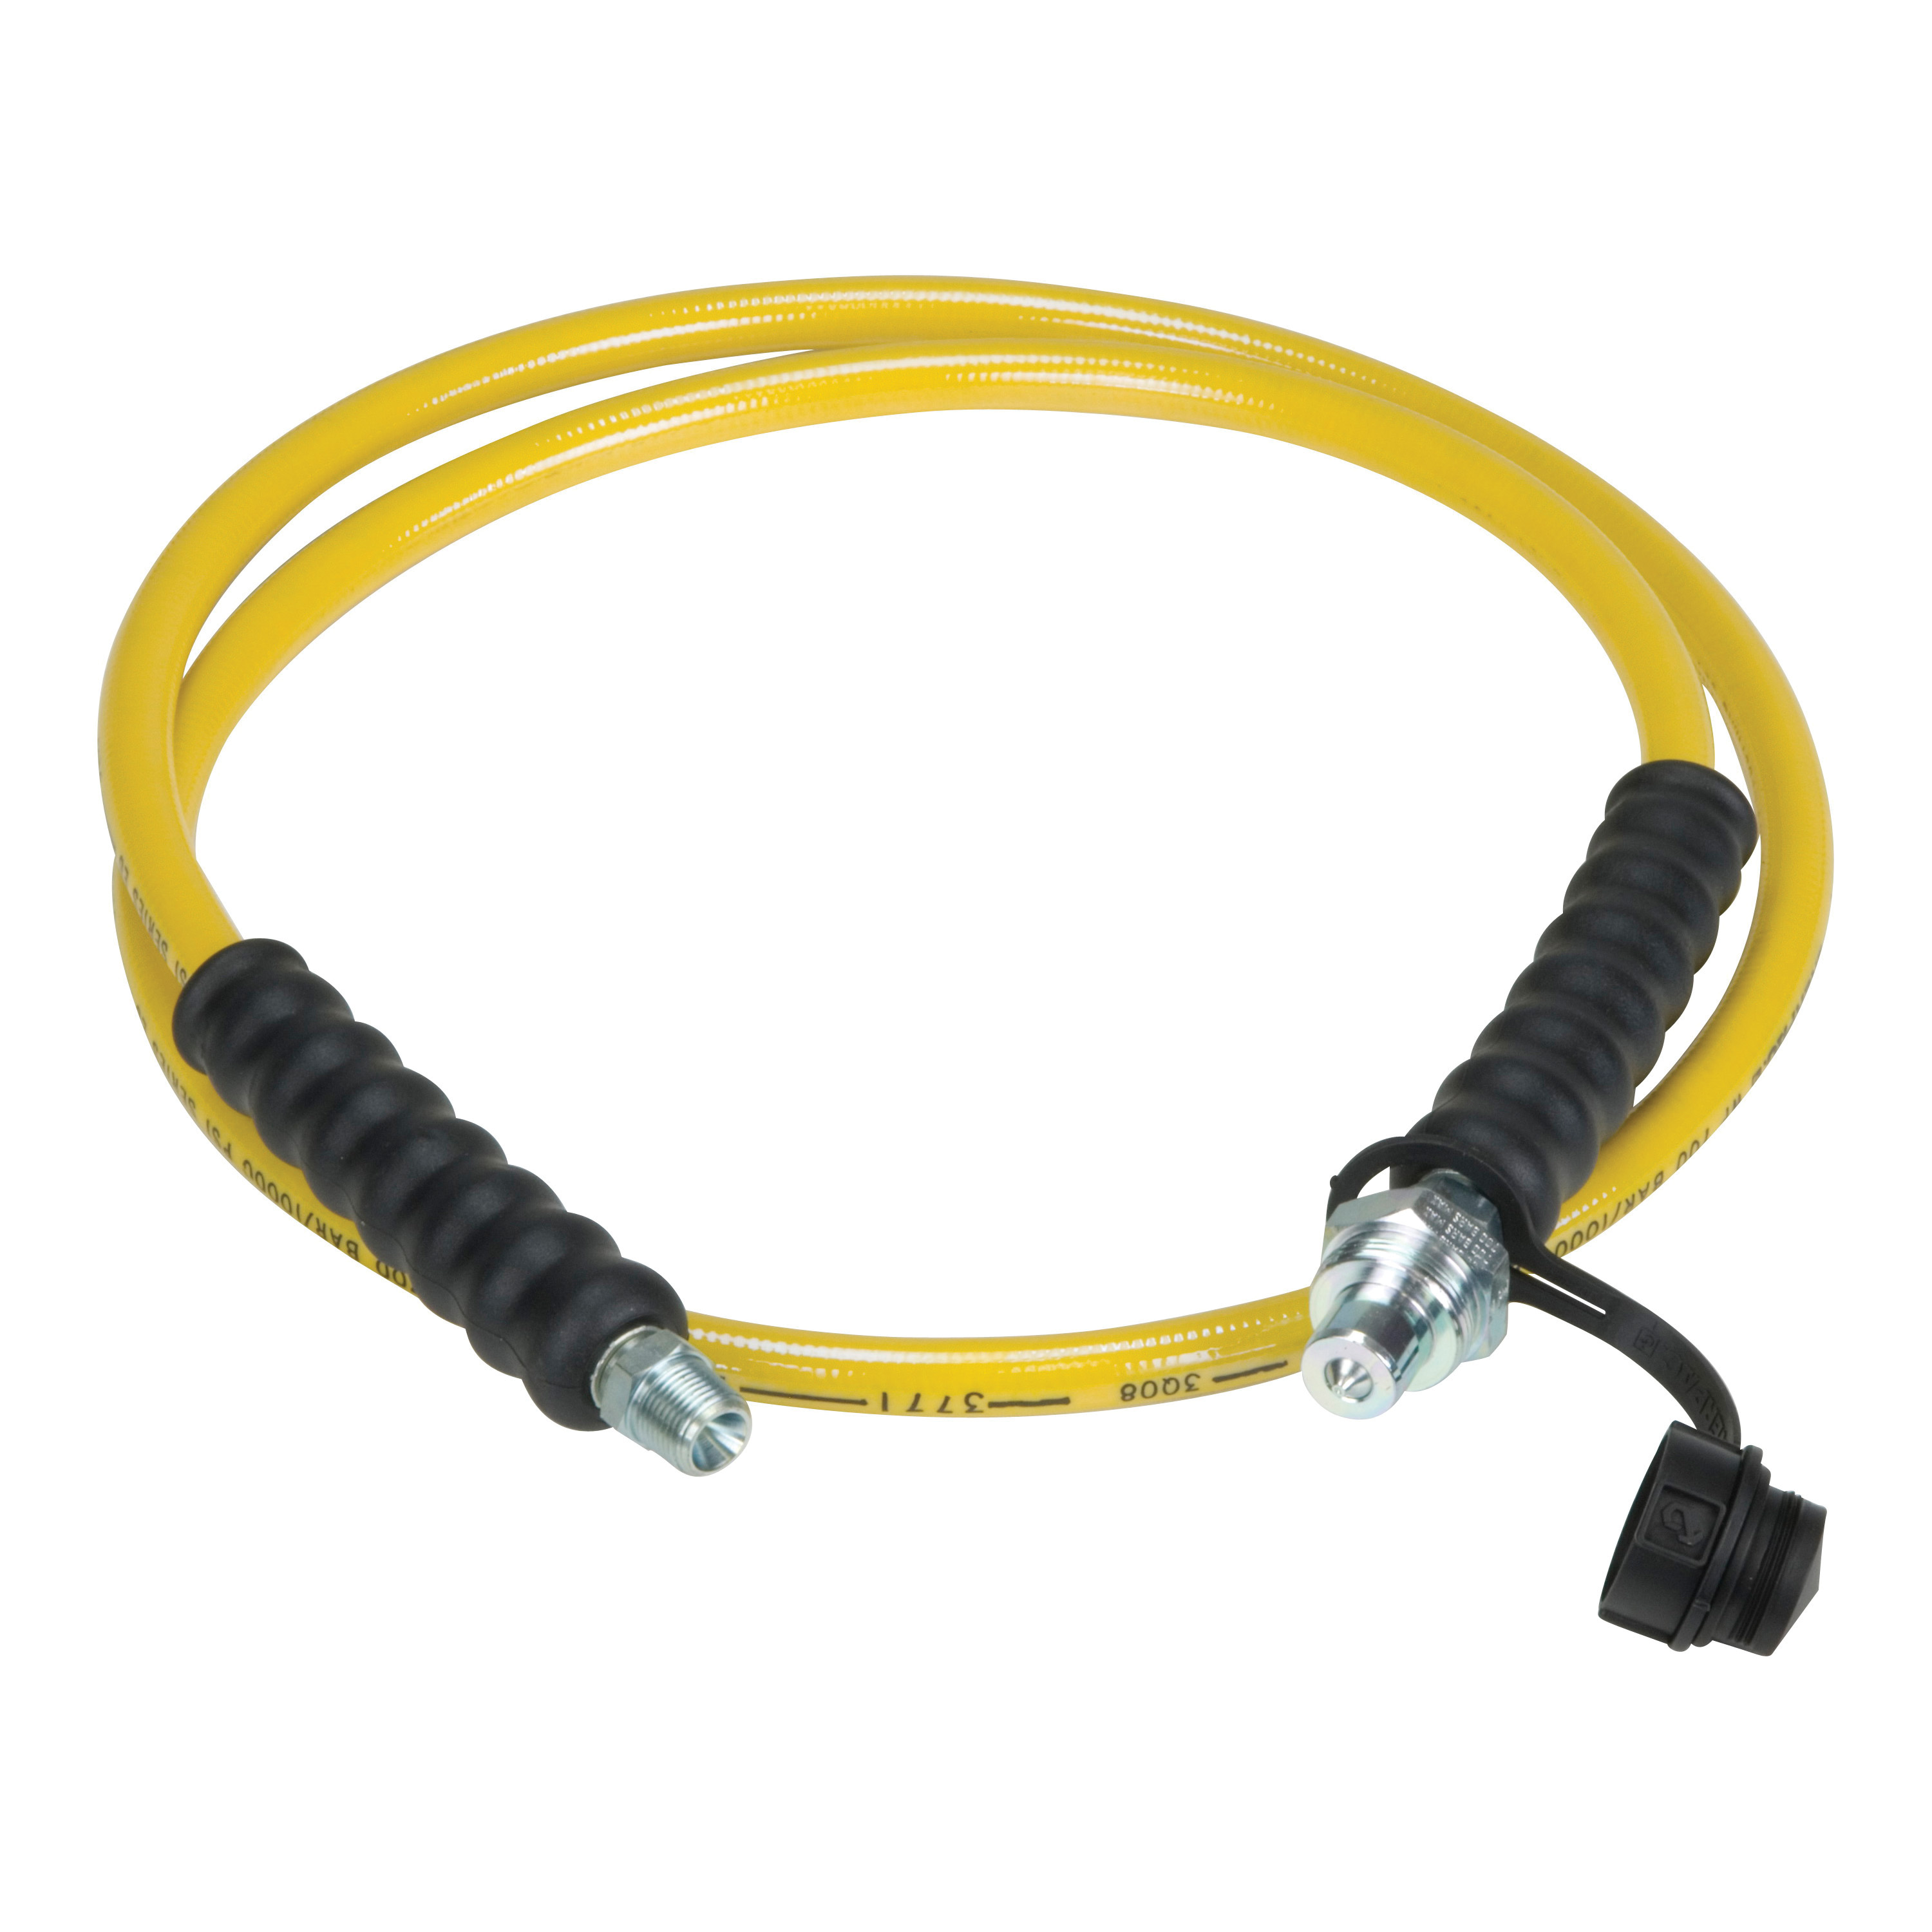 Enerpac® H-9210 High Pressure Hydraulic Hose, 3/8 in Nominal, MNPT End Style, 10 ft L, 700 bar Working, Rubber, Domestic